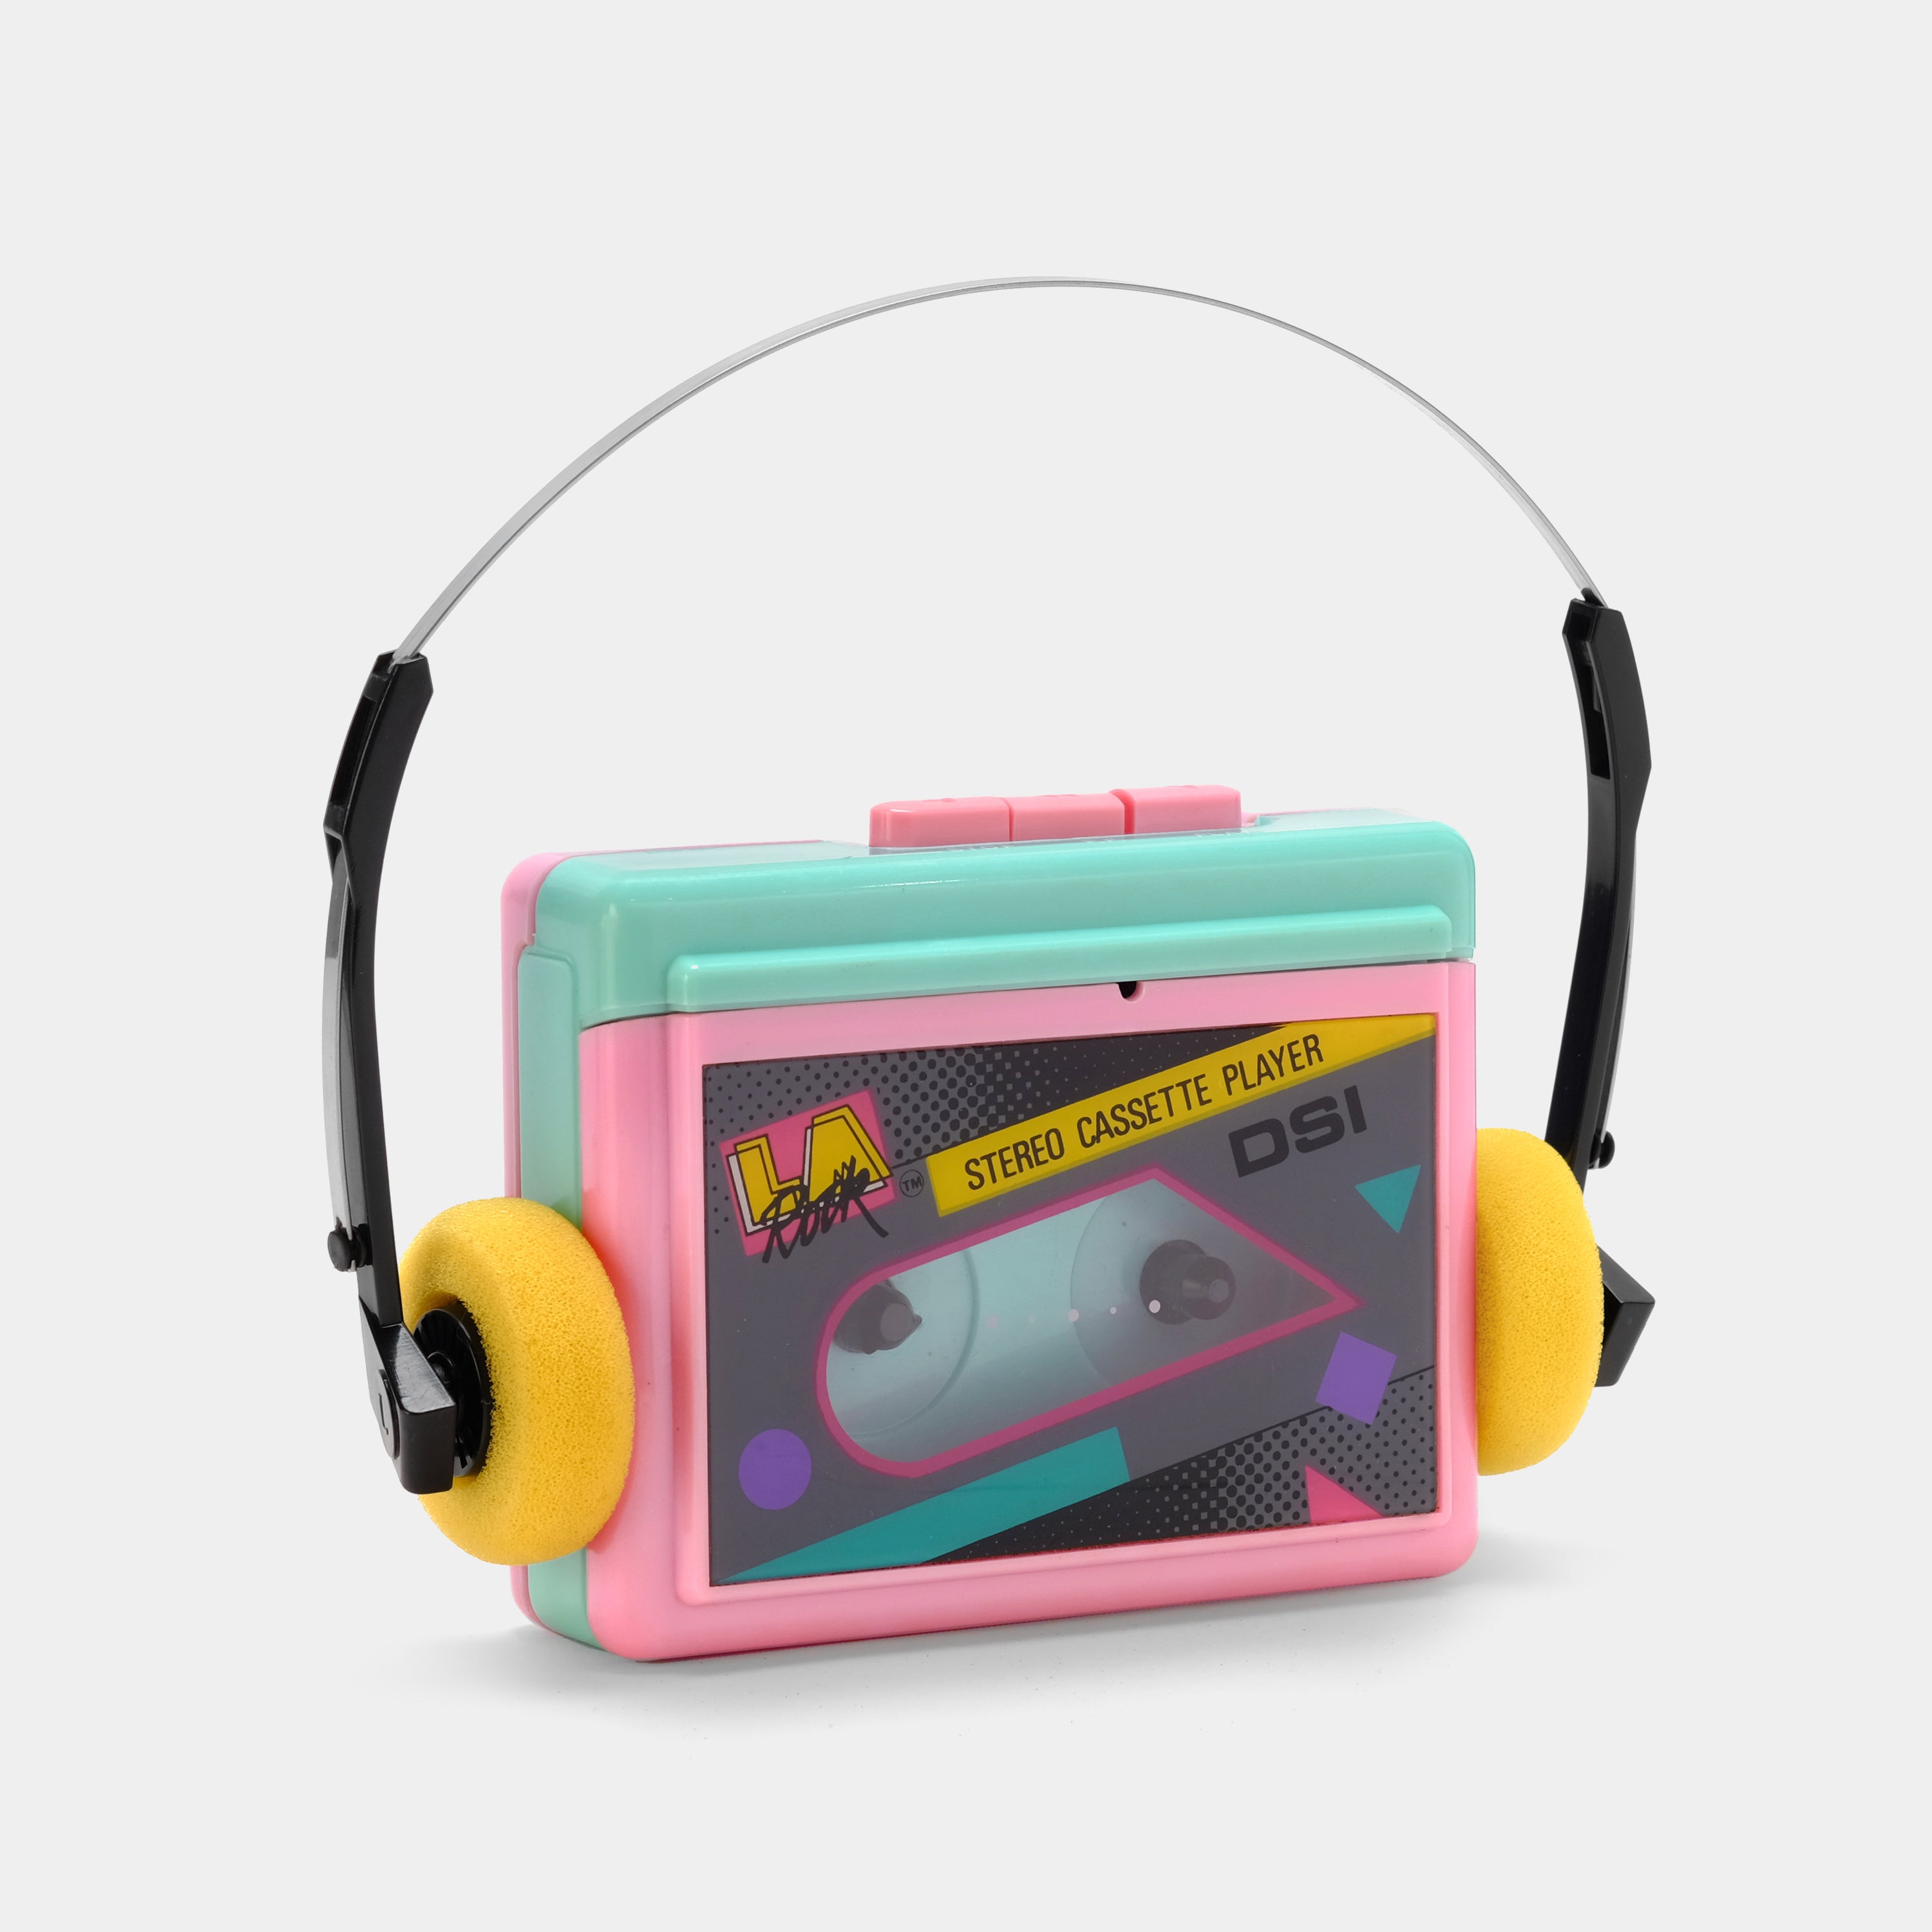 DSI LA Rock Pink and Green Portable Cassette Player